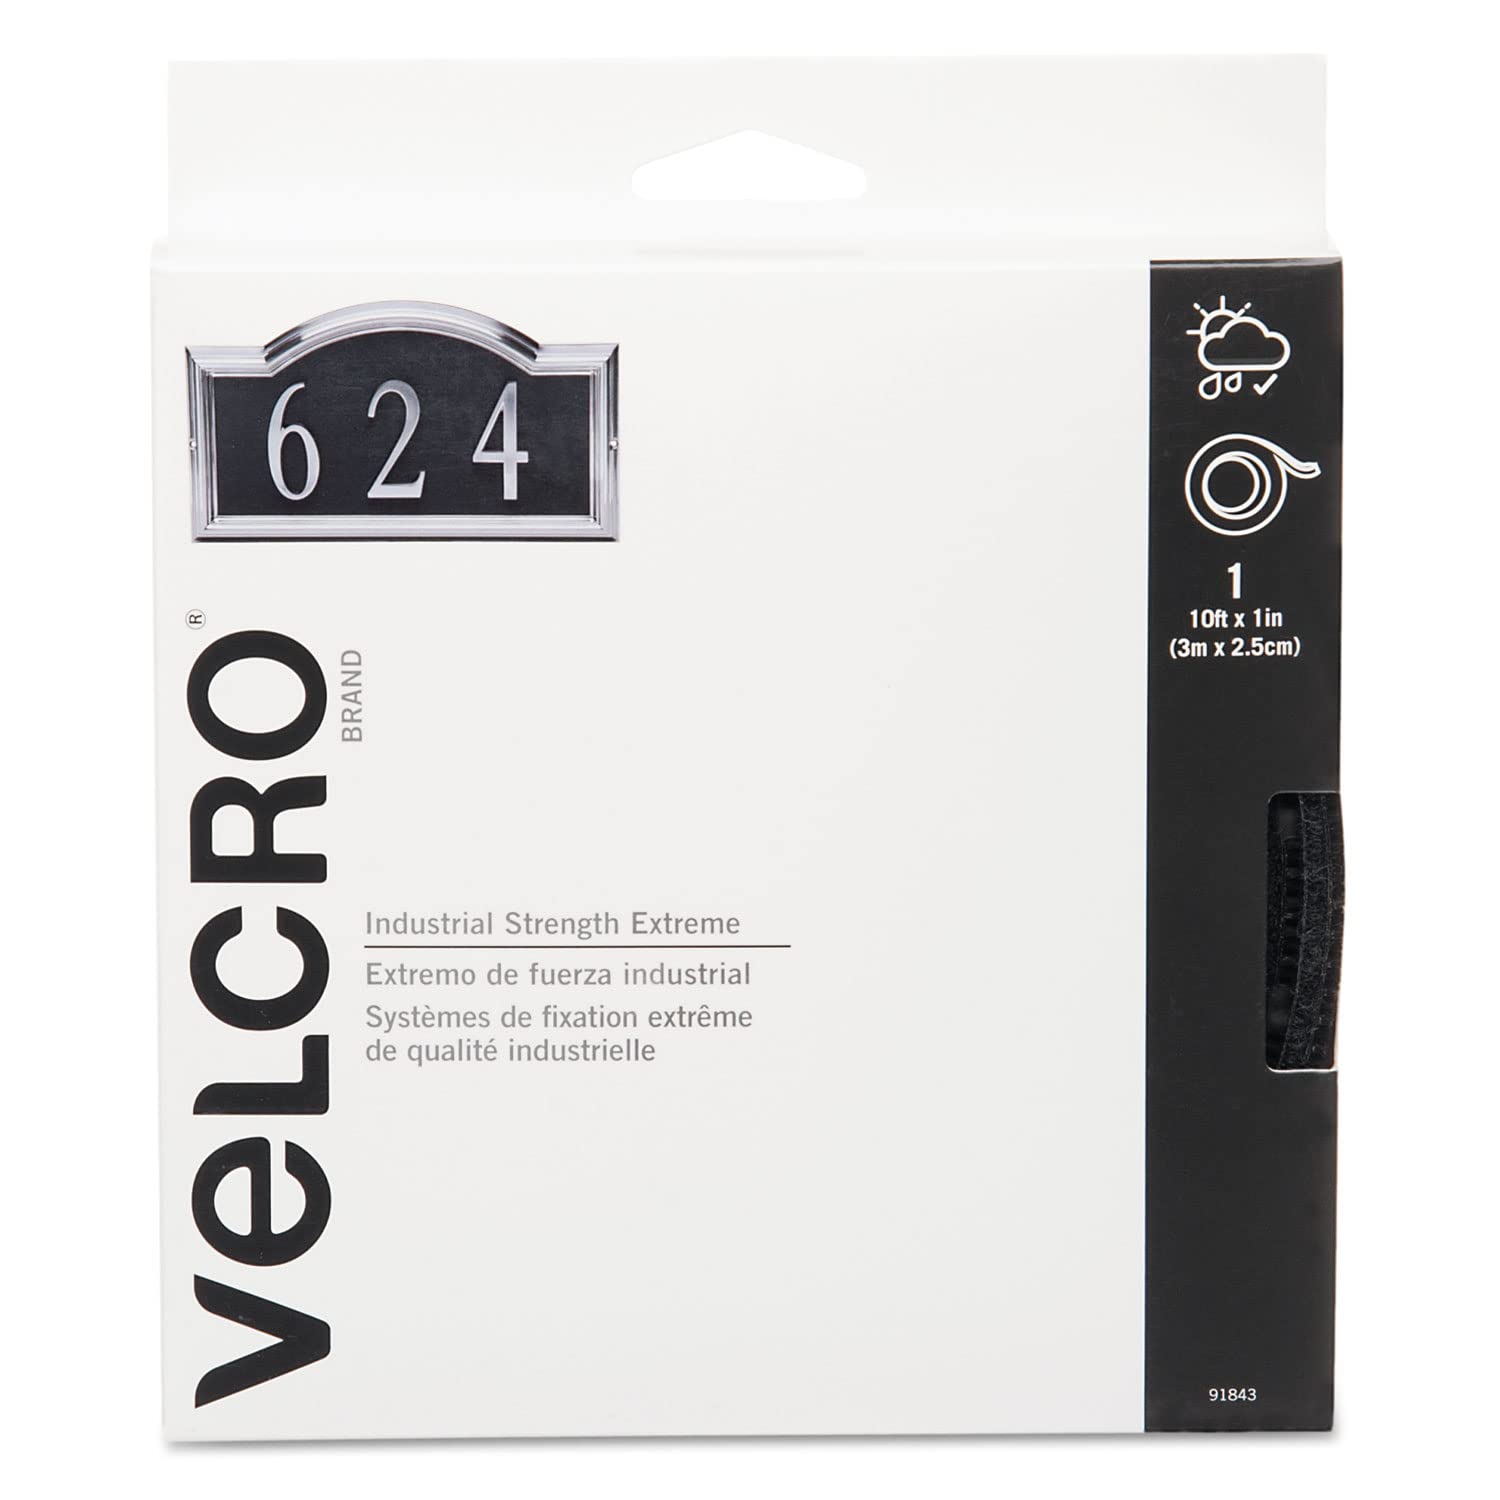 VELCRO Brand Extreme Outdoor Heavy Duty Tape, 10Ft x 1 In, Holds 15 lbs, Black with Stick on Adhesive